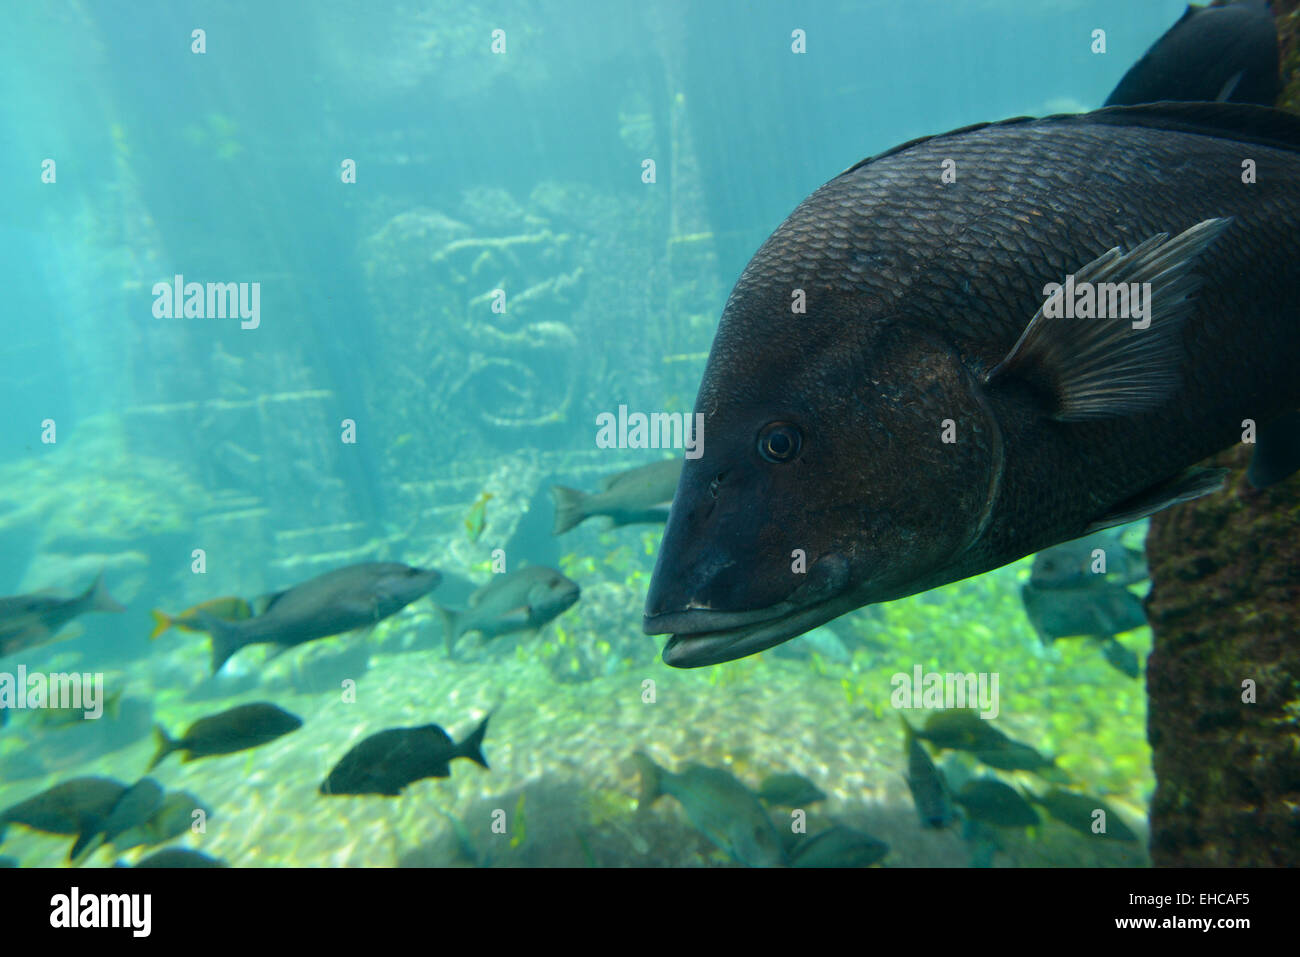 Underwater scene with a lot of colorful fish Stock Photo